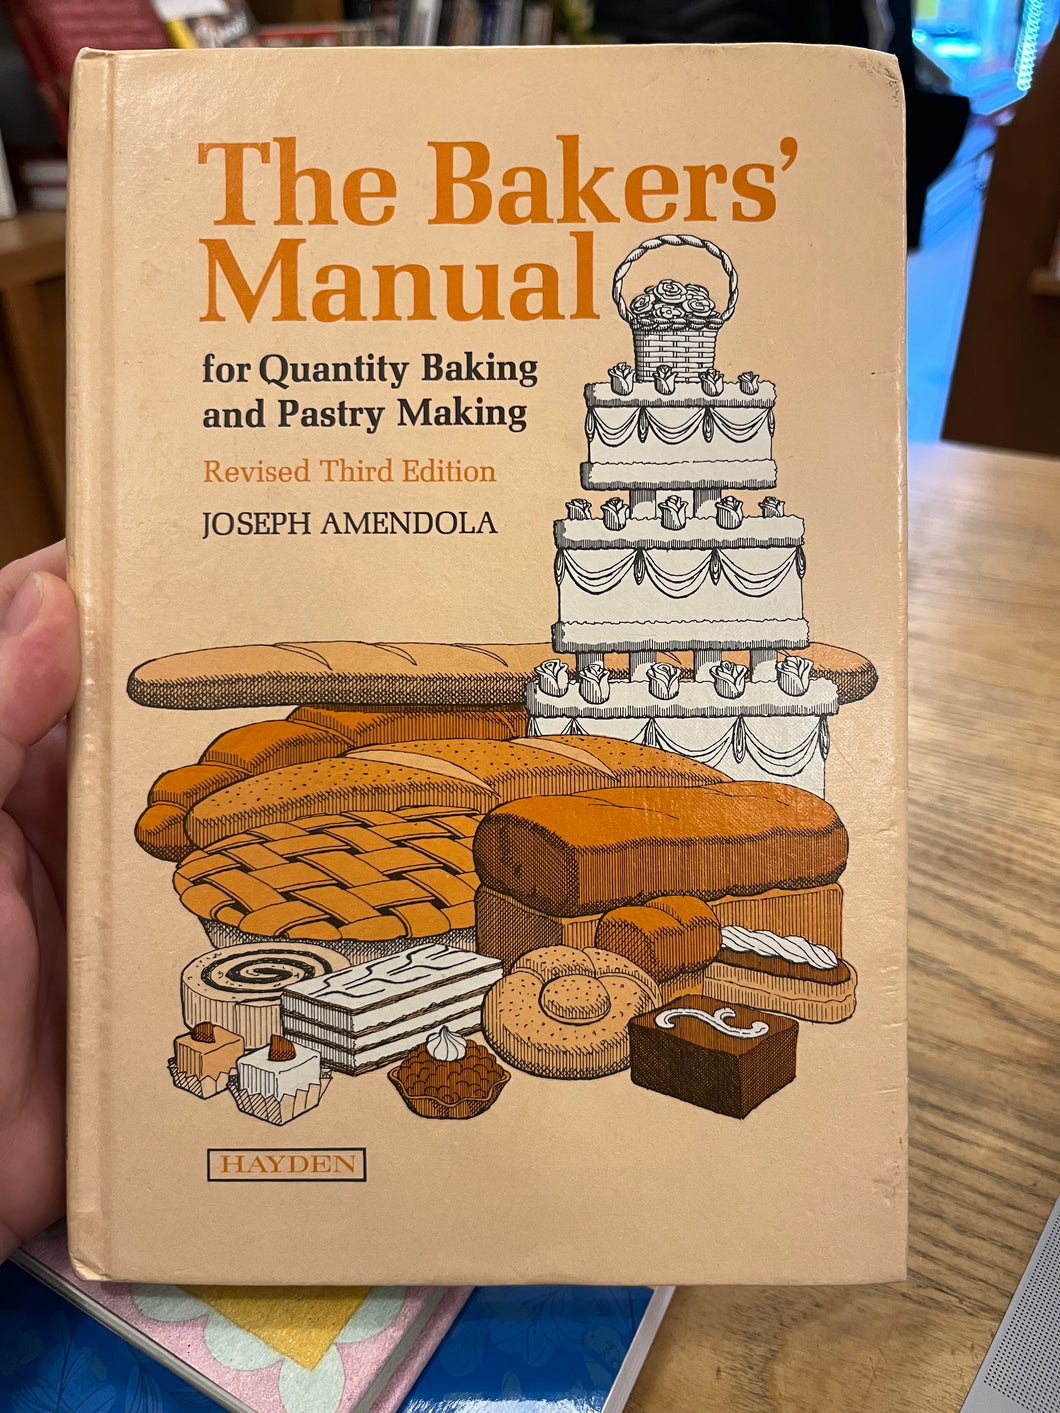 The Bakers' Manual for Quantity Baking and Pastry Making by Joseph Amendola